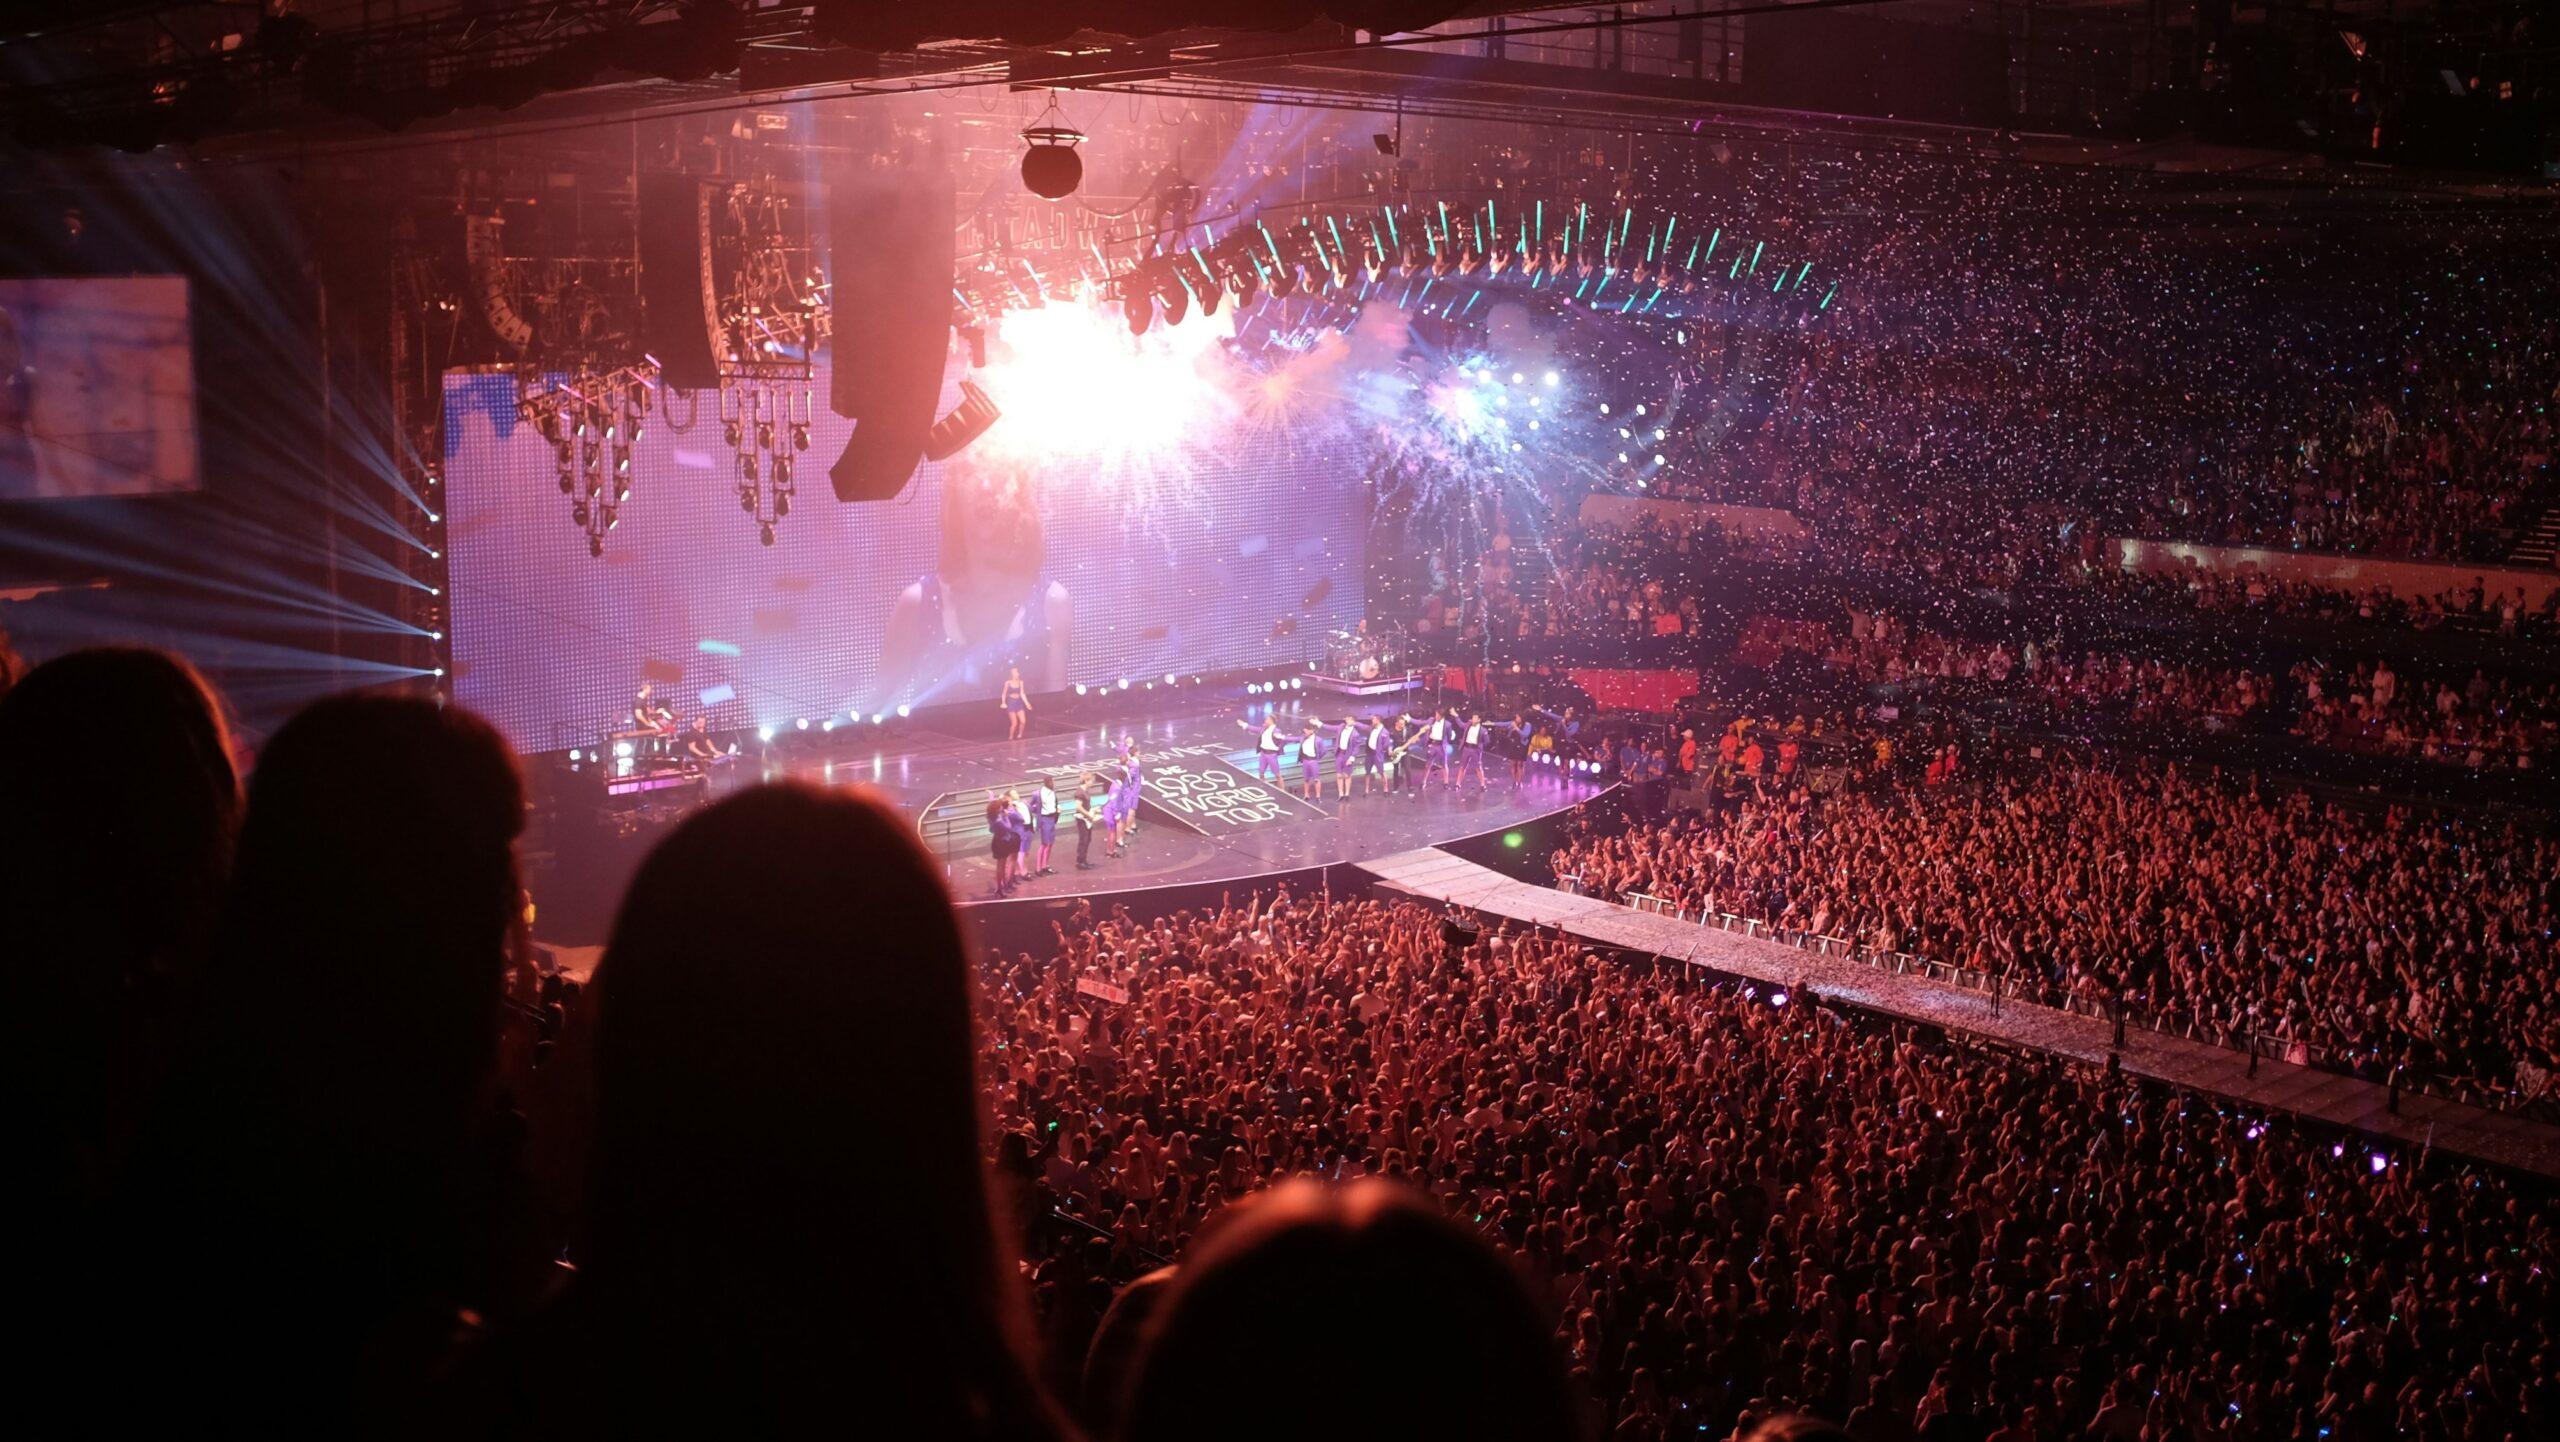 Taylor Swift on stage at a concert that is packed with people.